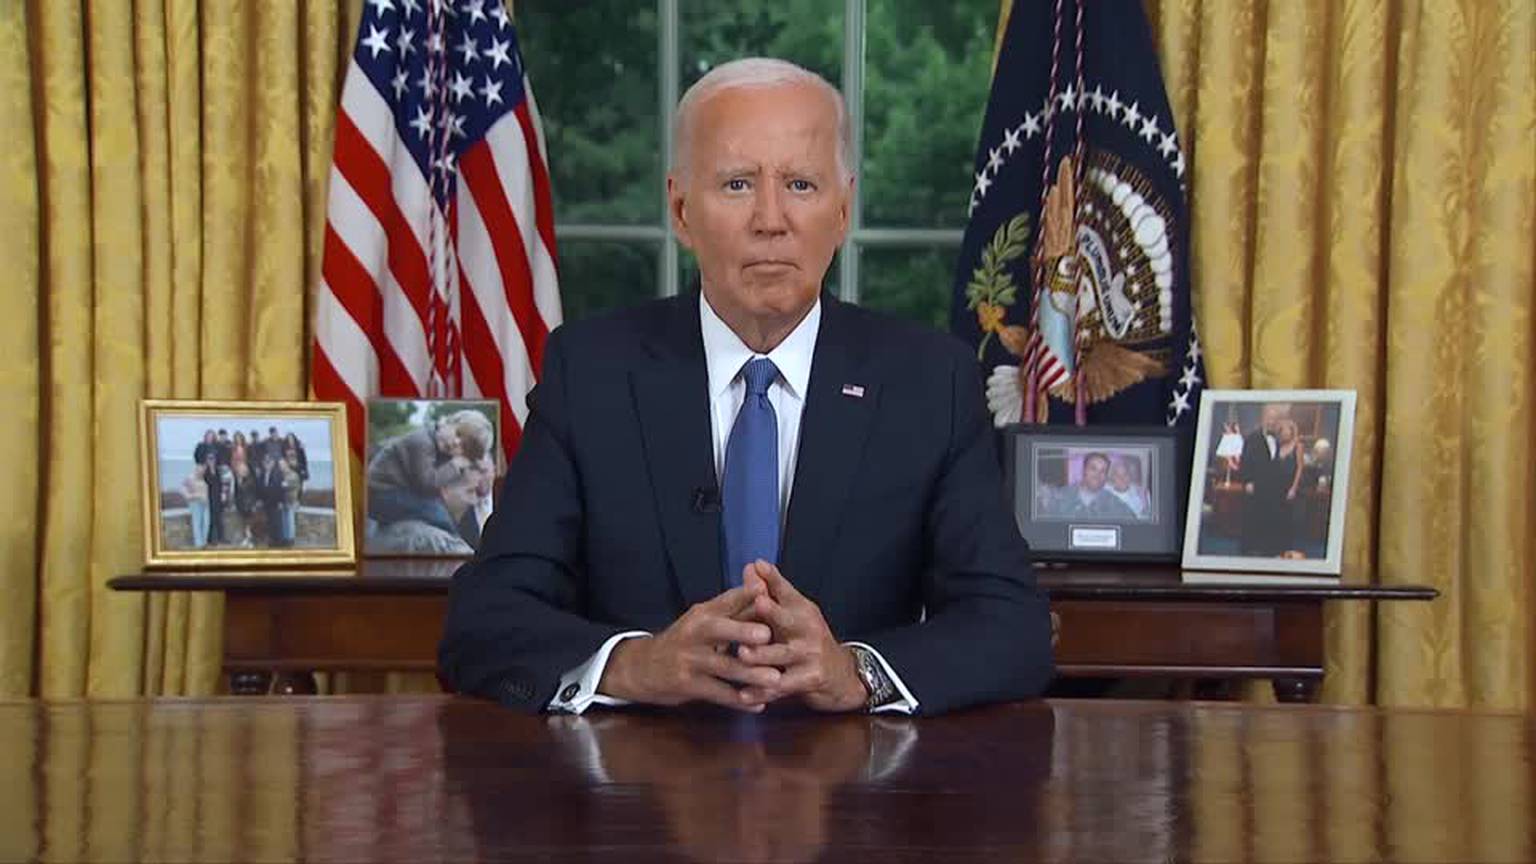 Video: Biden gives Oval Office address, says time to ‘pass the torch’ [Video]